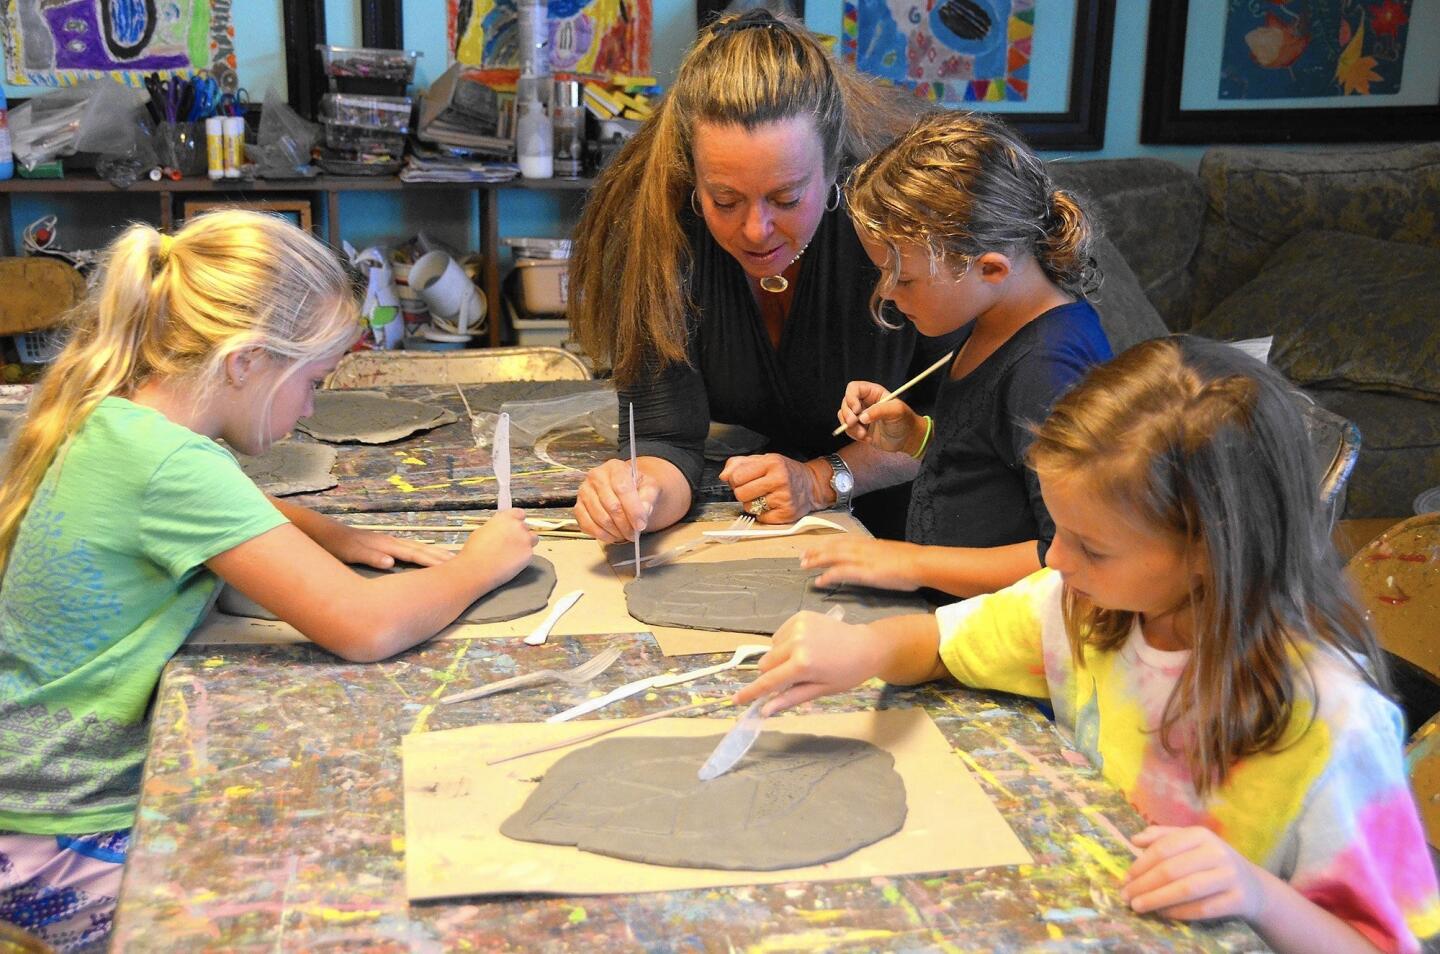 Lisa Albert helps kids carve a leaf pattern into clay in her Saturday morning art class at Albert's art studio.